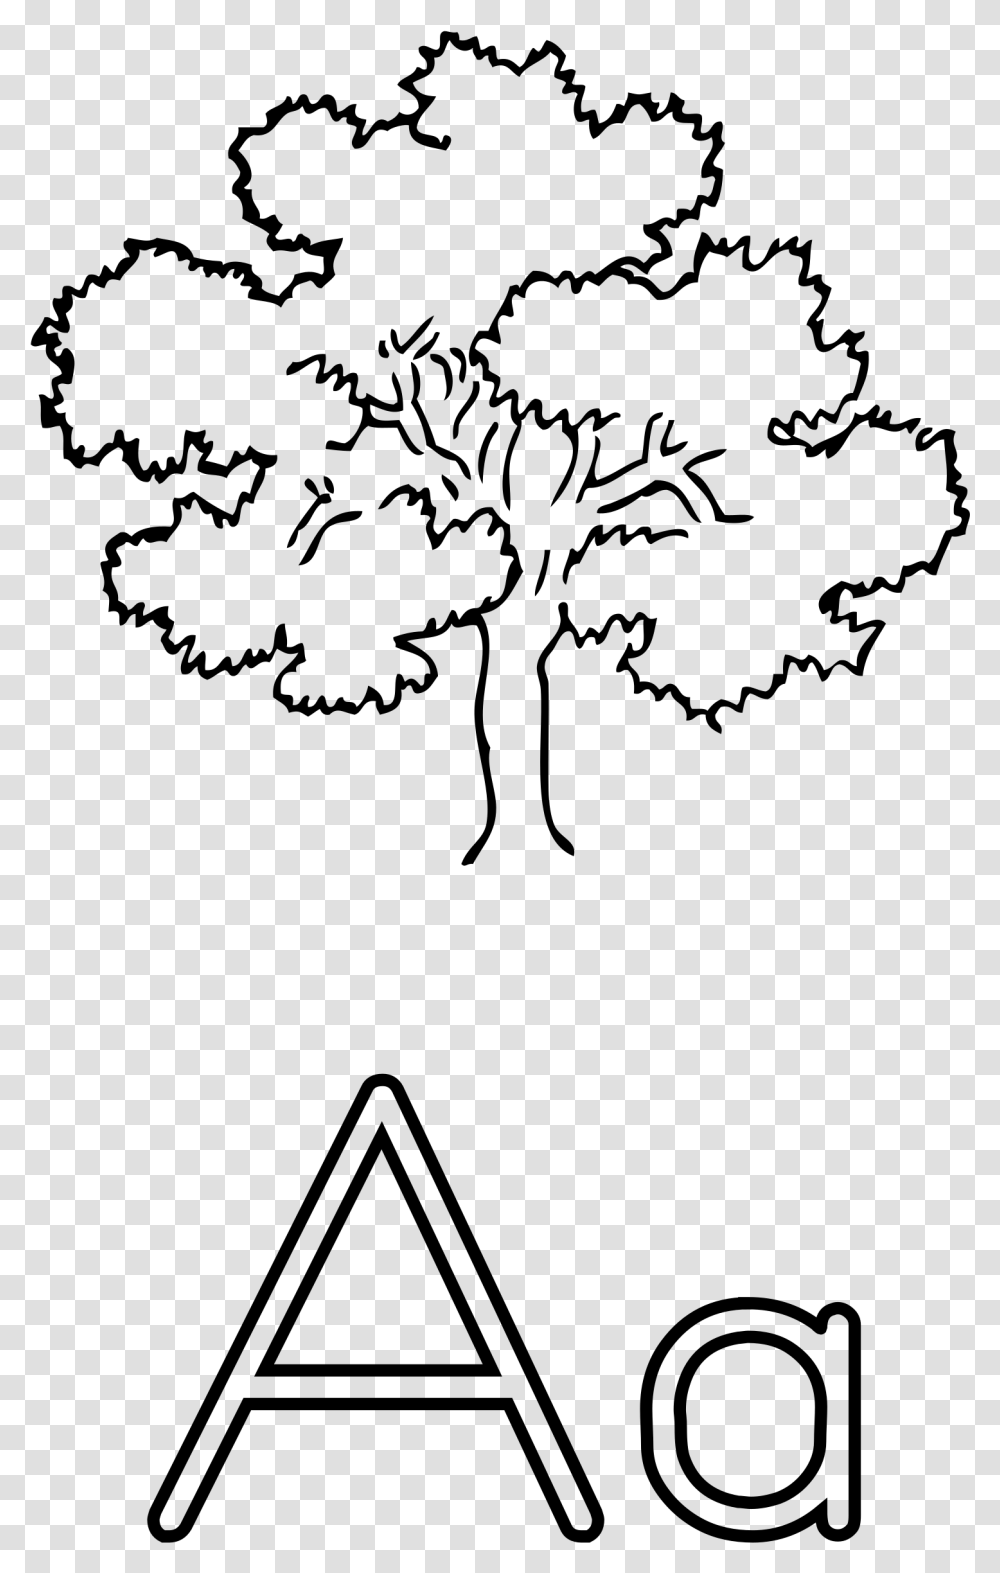 Letra A De Rbol Clip Arts Oak Tree Drawing Easy, Outdoors, Nature, Outer Space, Astronomy Transparent Png